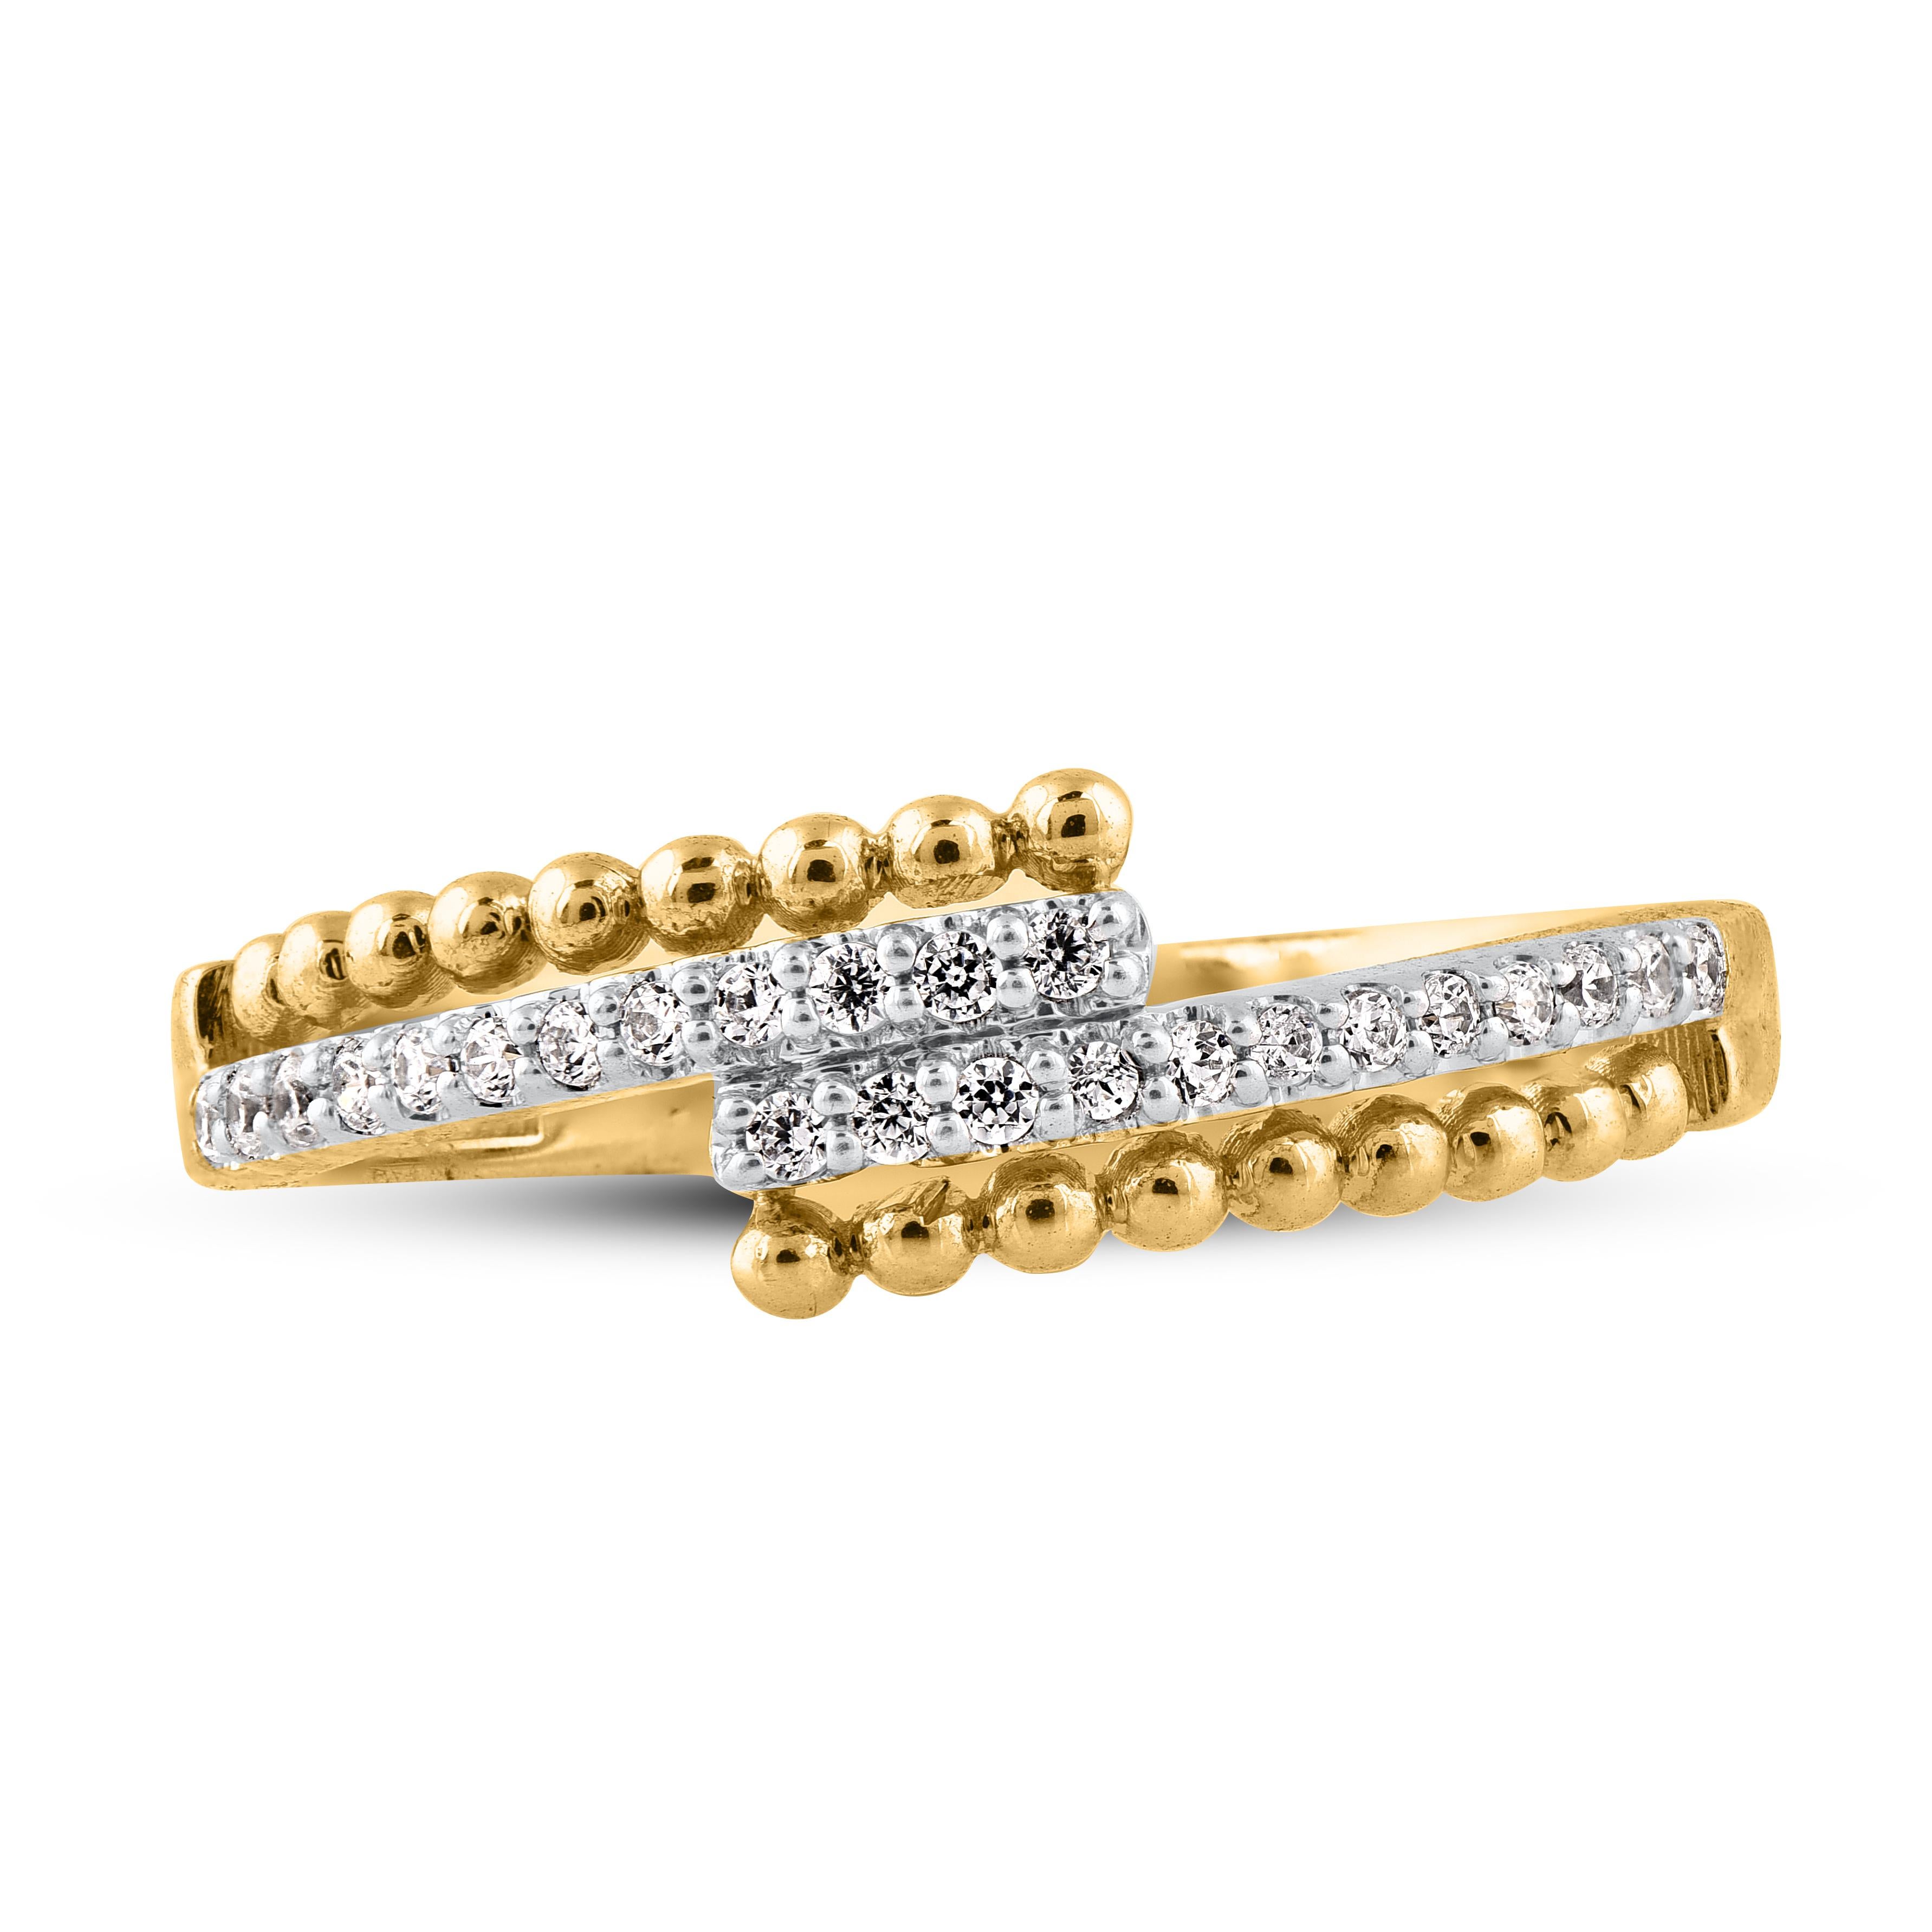 Sure to become an instant favorite, this sparking diamond bypass wedding band celebrates your romance. The ring is crafted from 14-karat gold in your choice of white, rose, or yellow, and features round brilliant 24 diamonds, prong set, H-I color I2